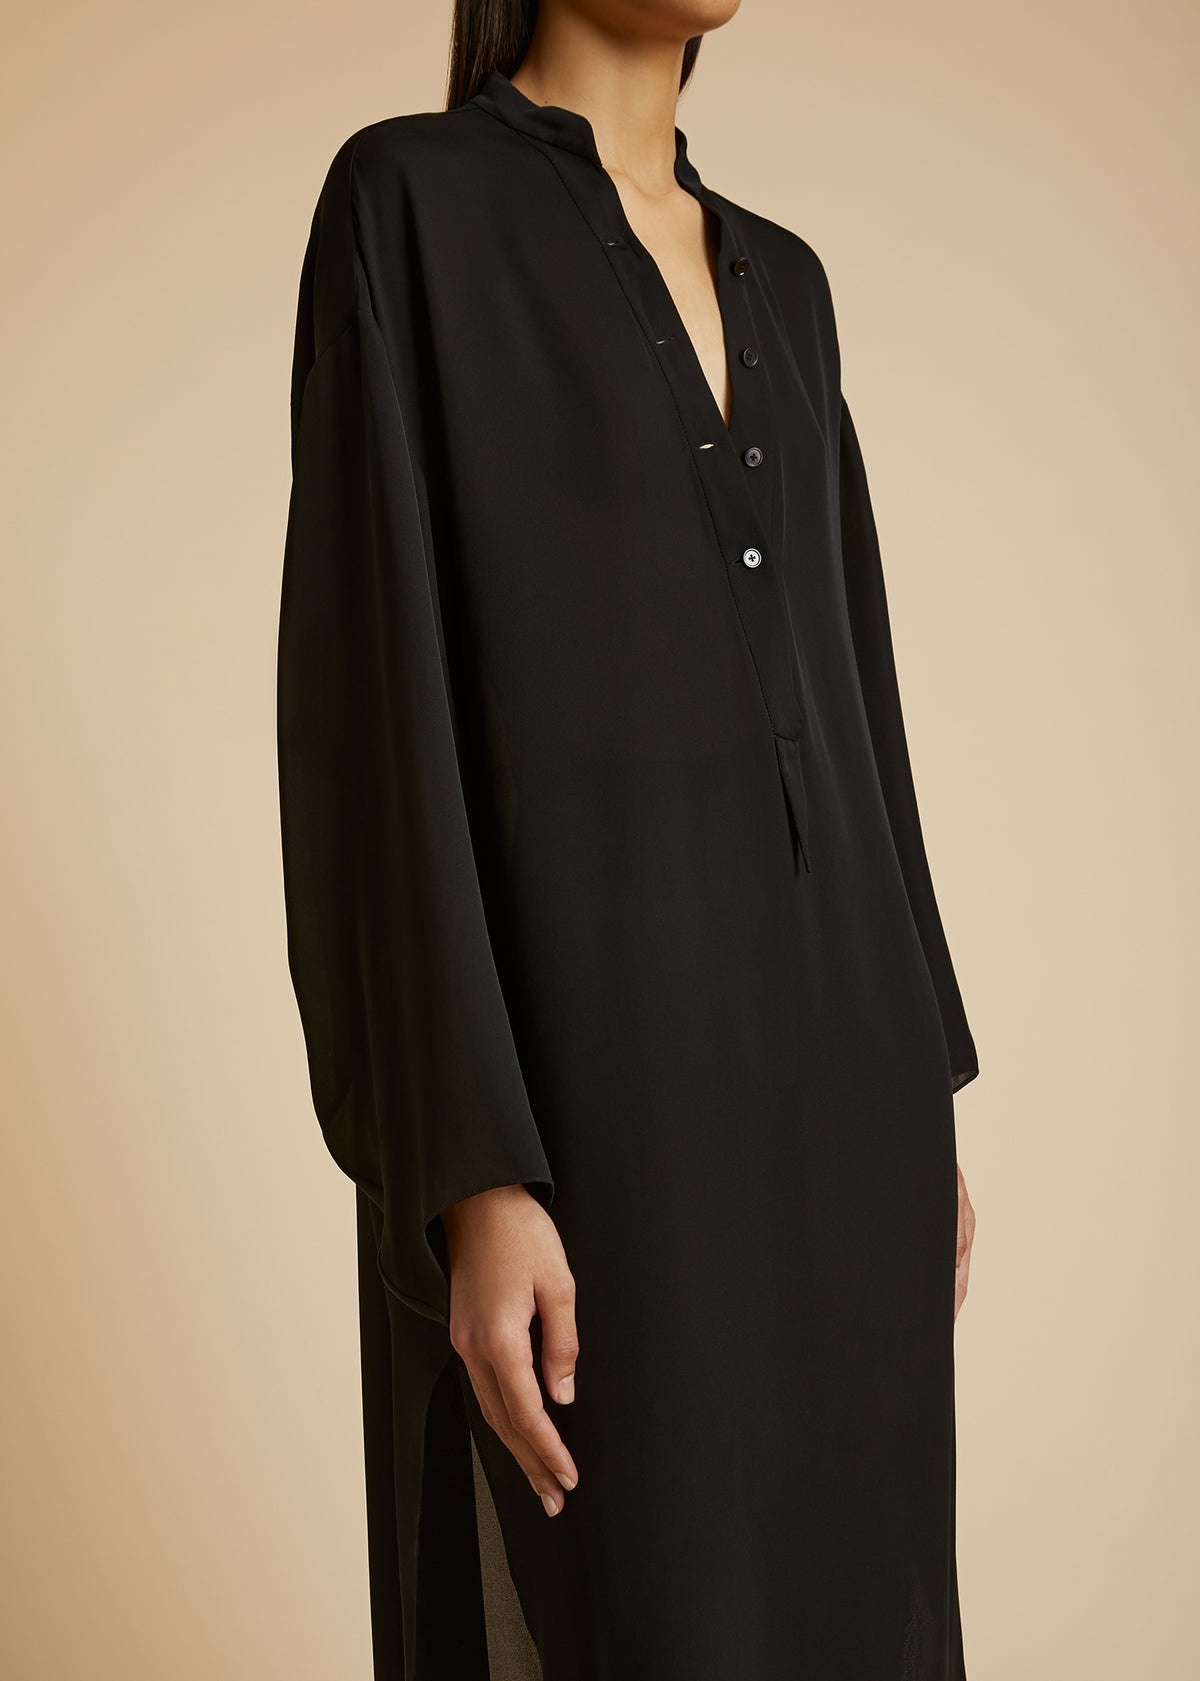 The Brom Dress in Black - 4